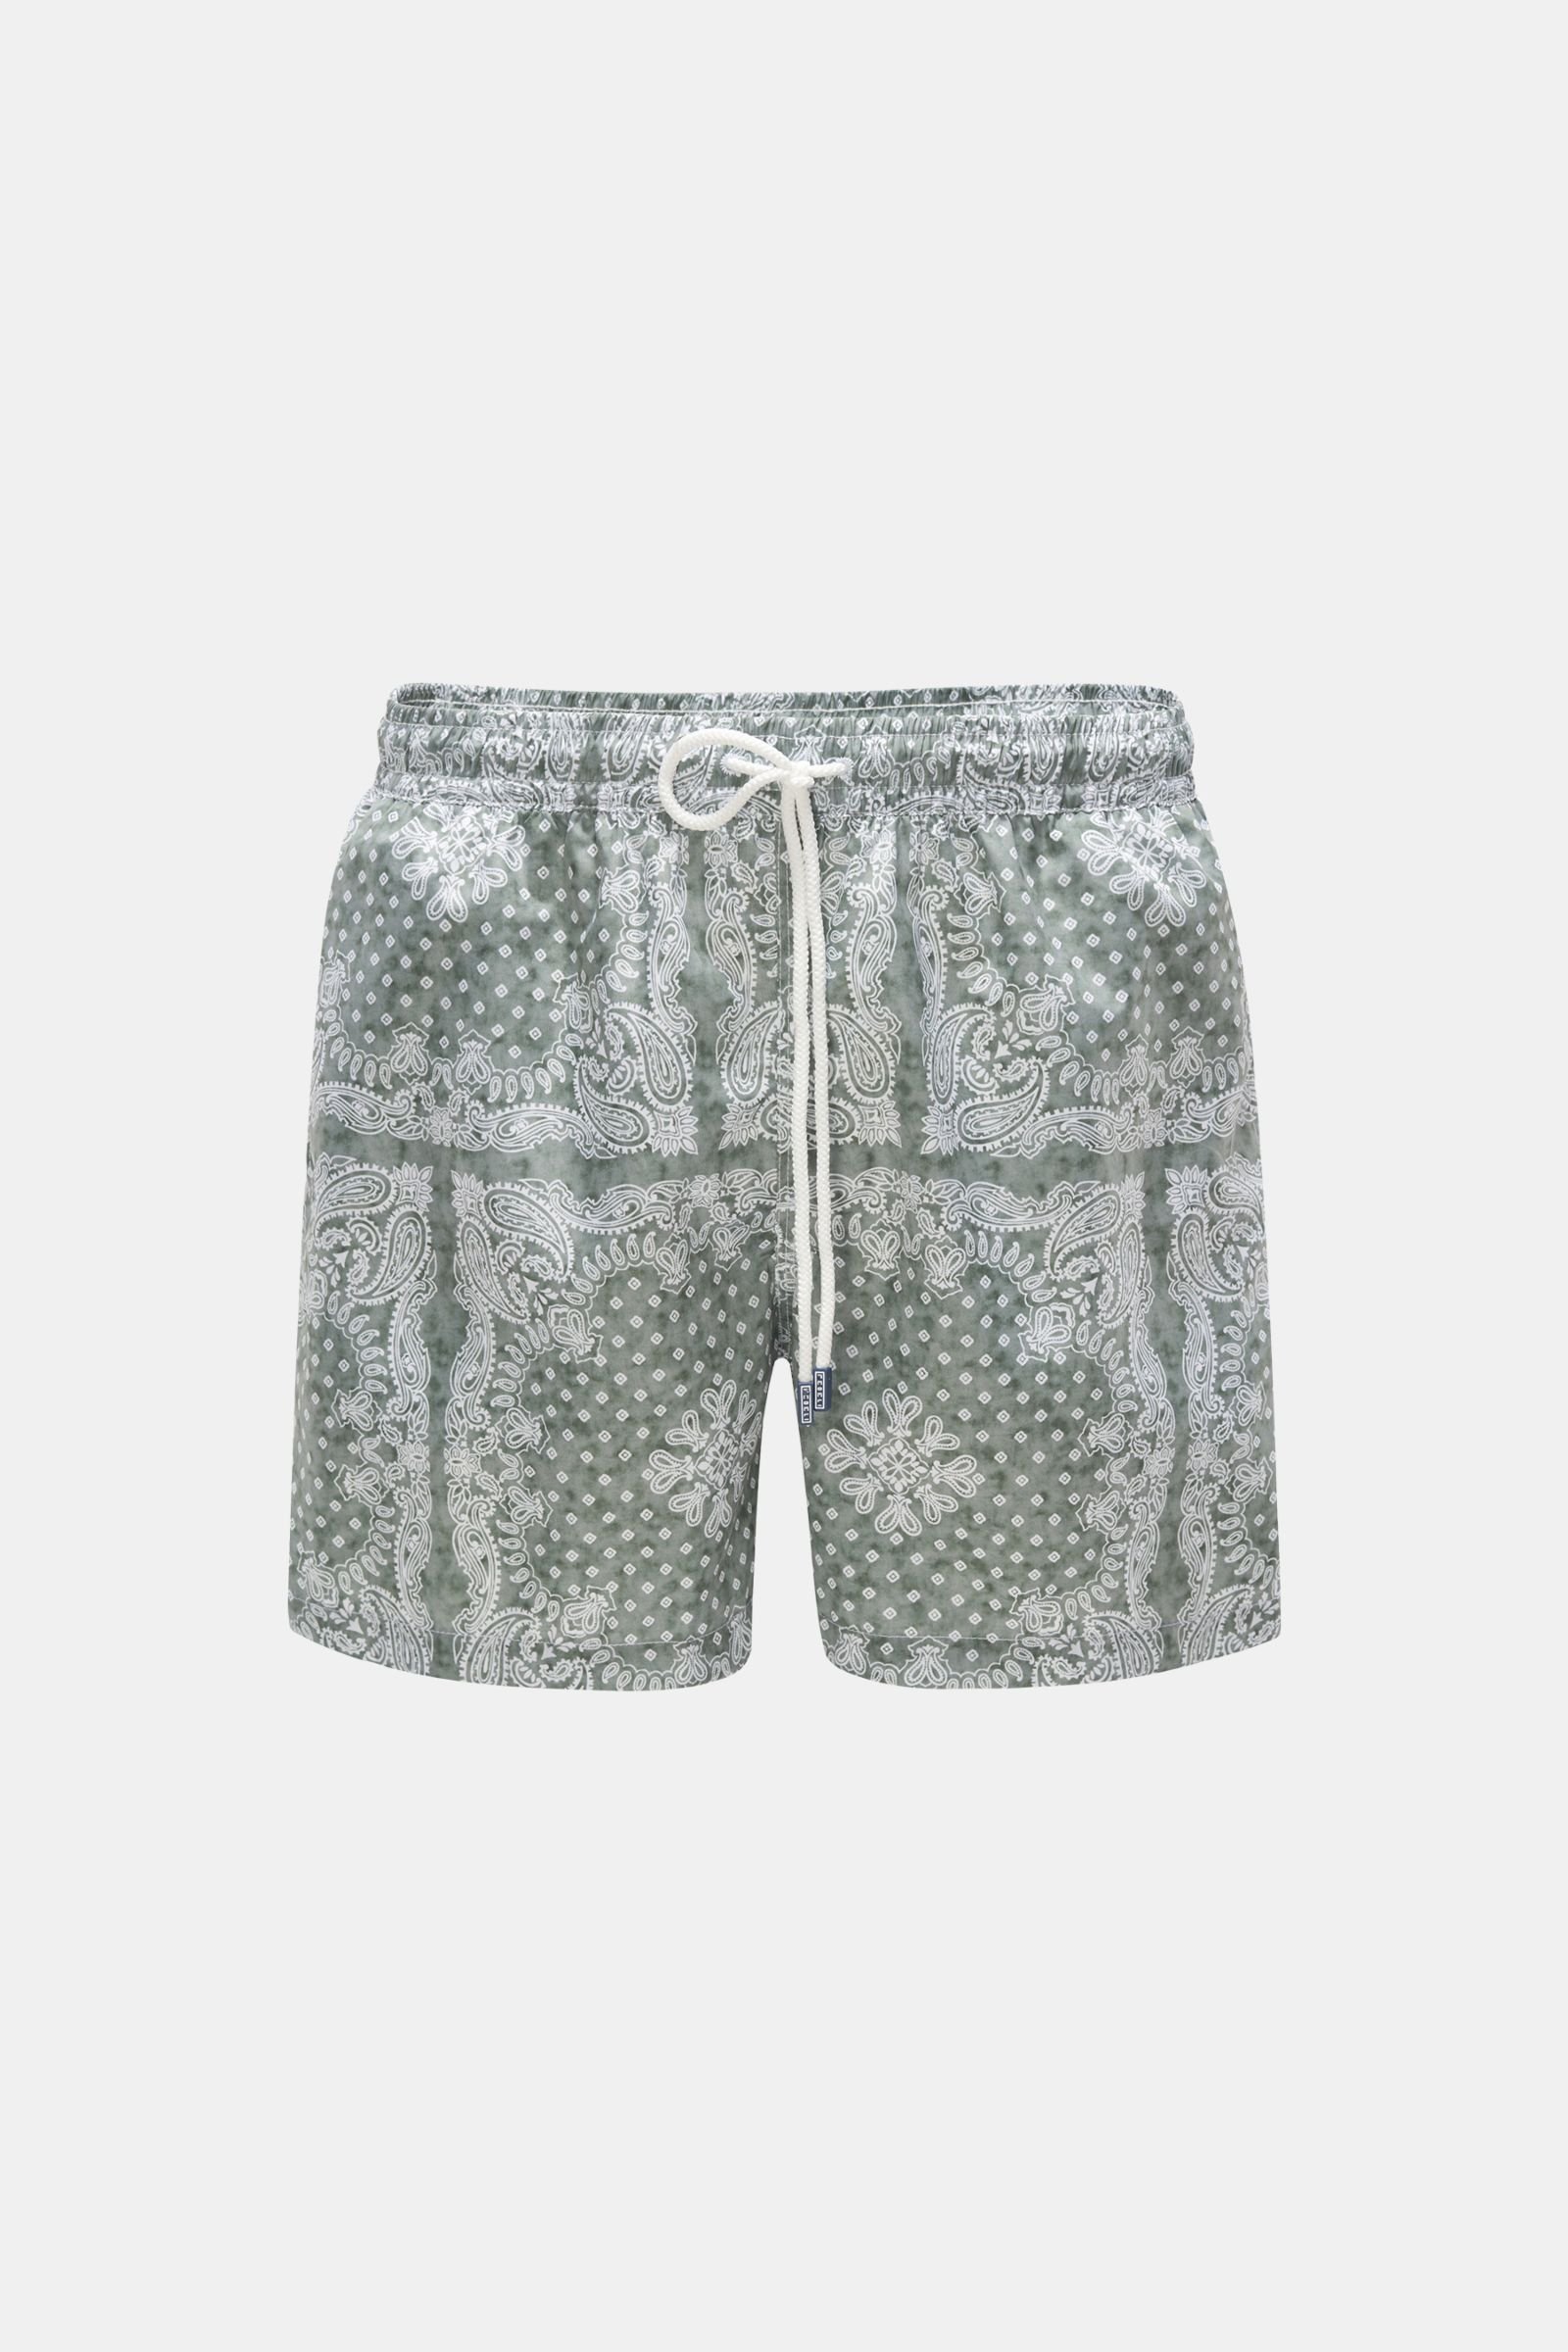 Swim shorts 'Madeira Airstop' grey-green/white patterned